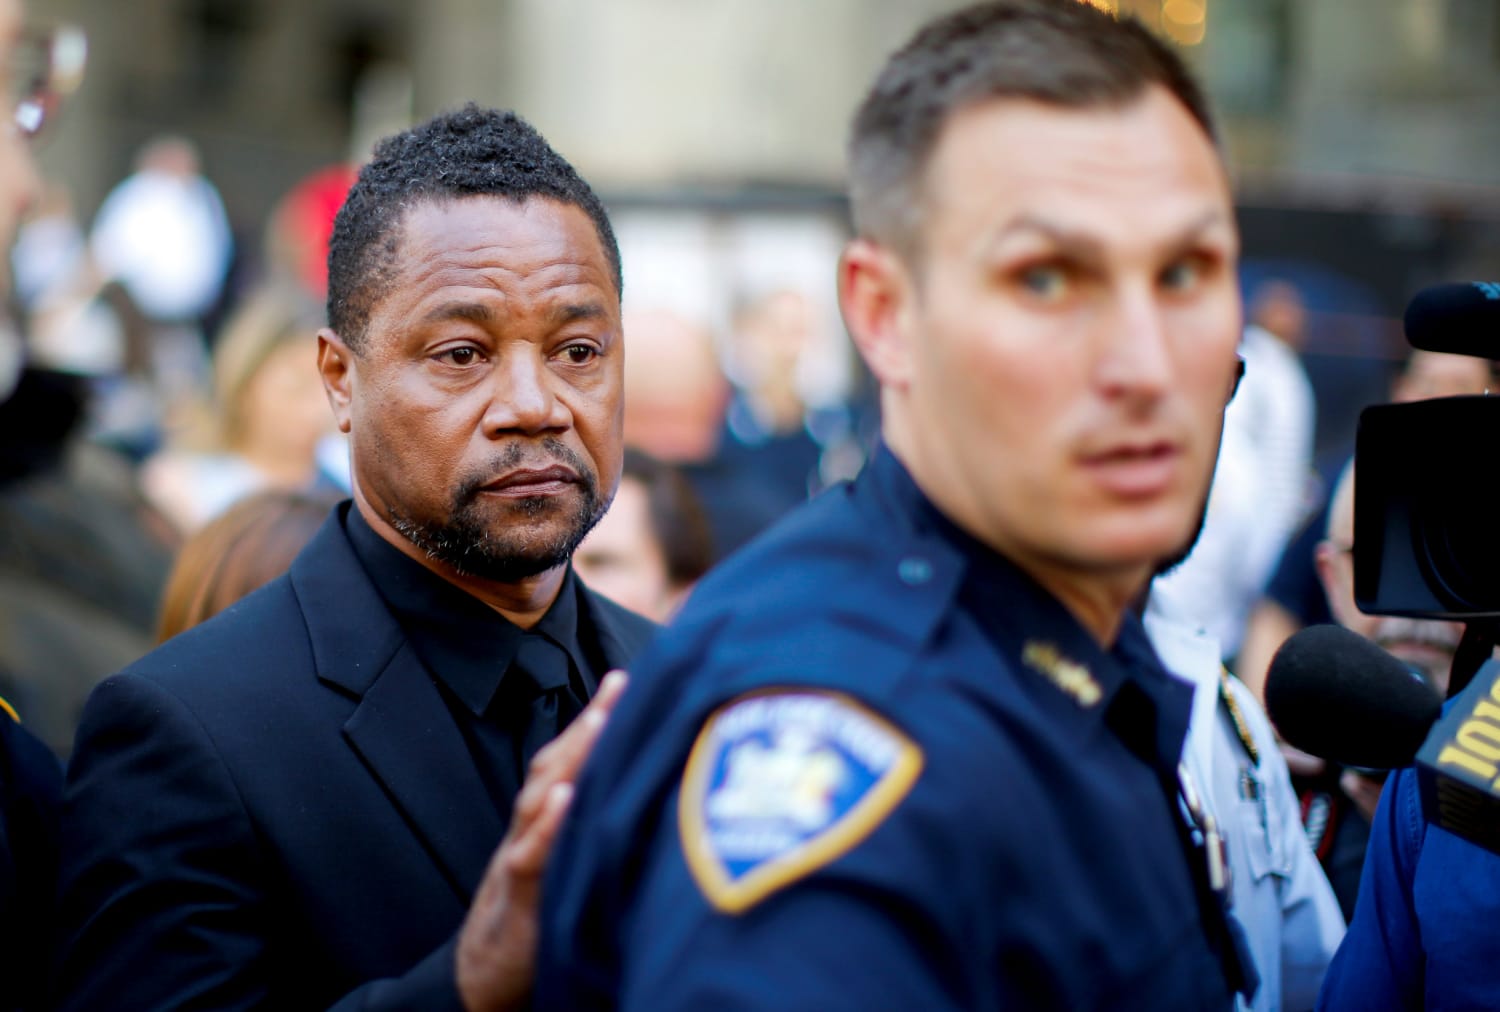 Cuba Gooding Jr. accused by seven more women of sexual misconduct.